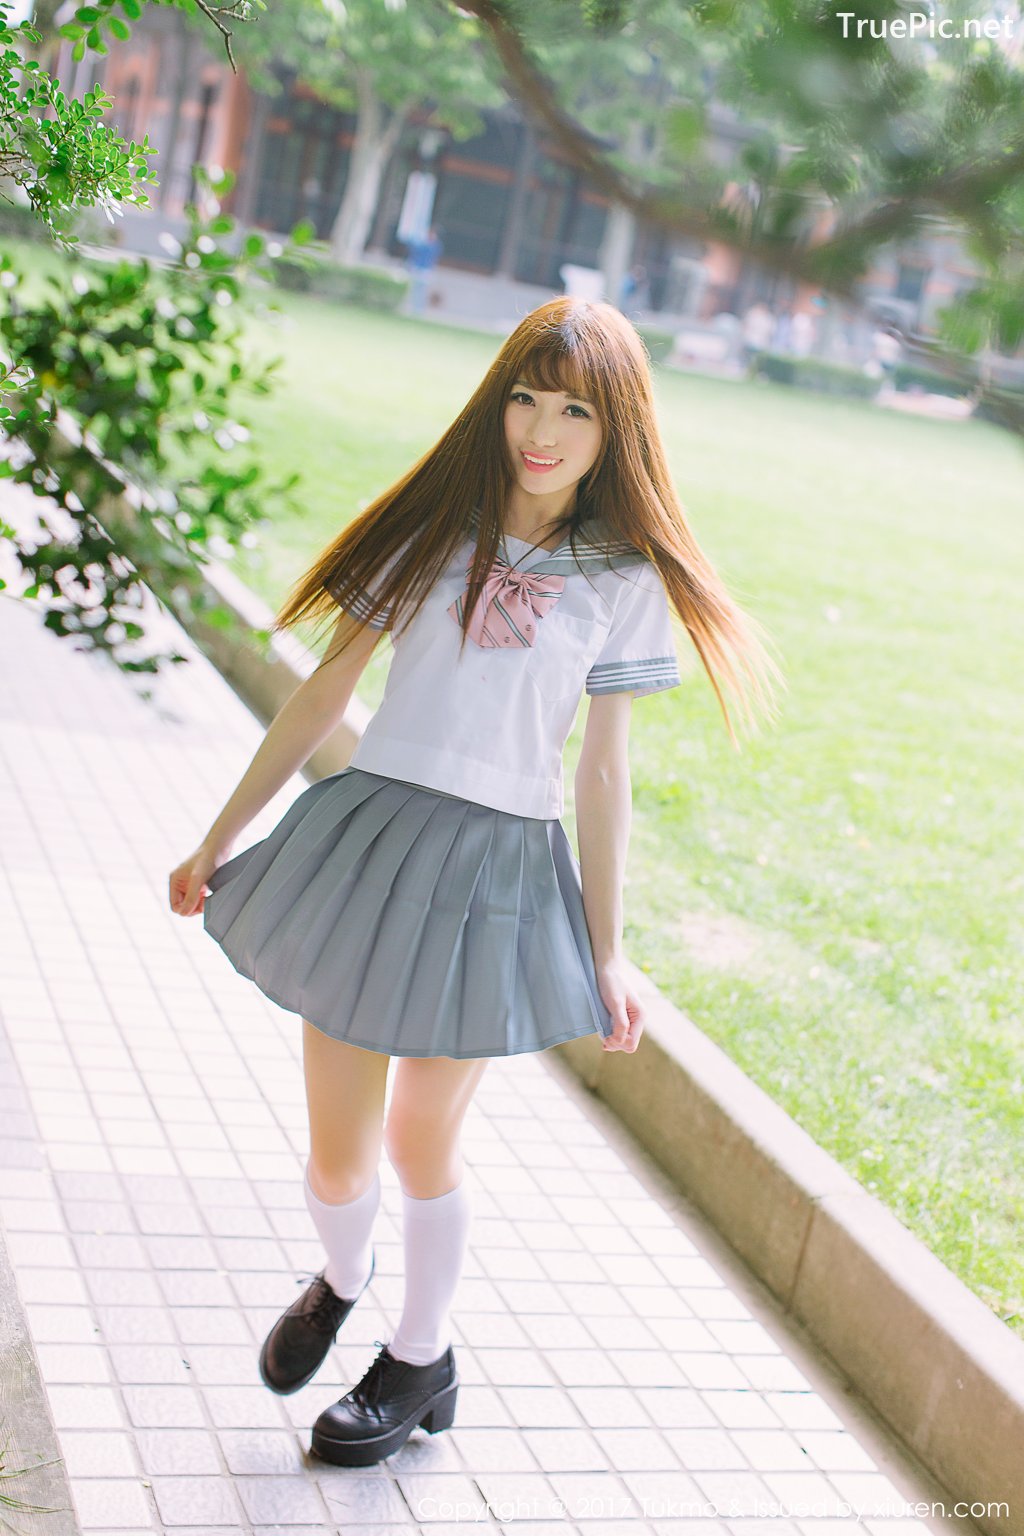 Image-Tukmo-Vol-094-Model-Zhao-Nai-Ying-赵乃莹-Lovely-School-Girl-With-Student-Uniform-TruePic.net- Picture-16